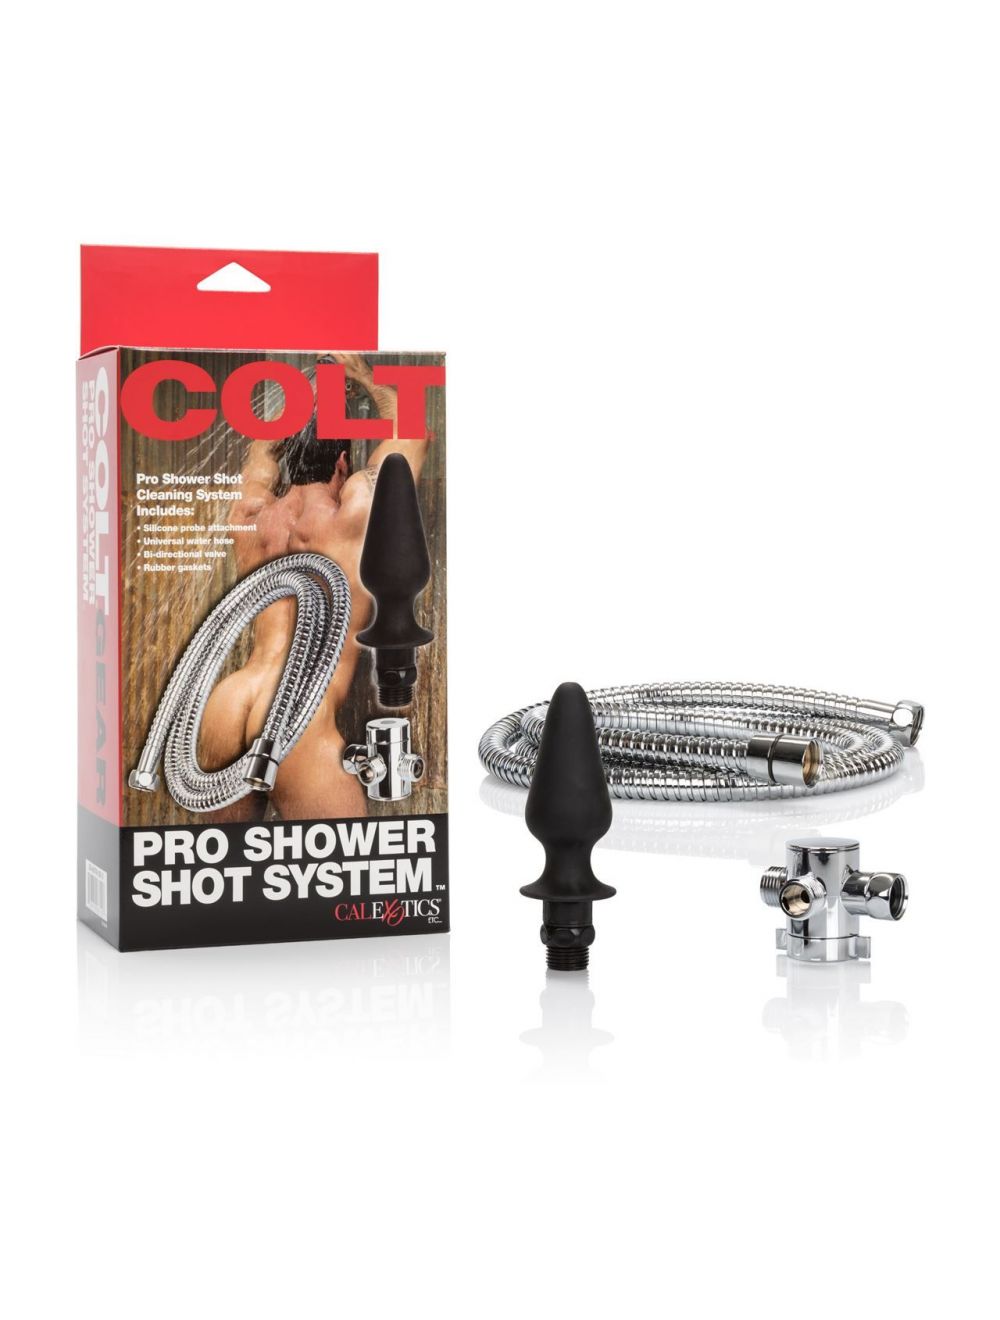 COLT Pro Shower Shot System - High-Quality Anal Douche for Exciting and Easy Shower Douche Play